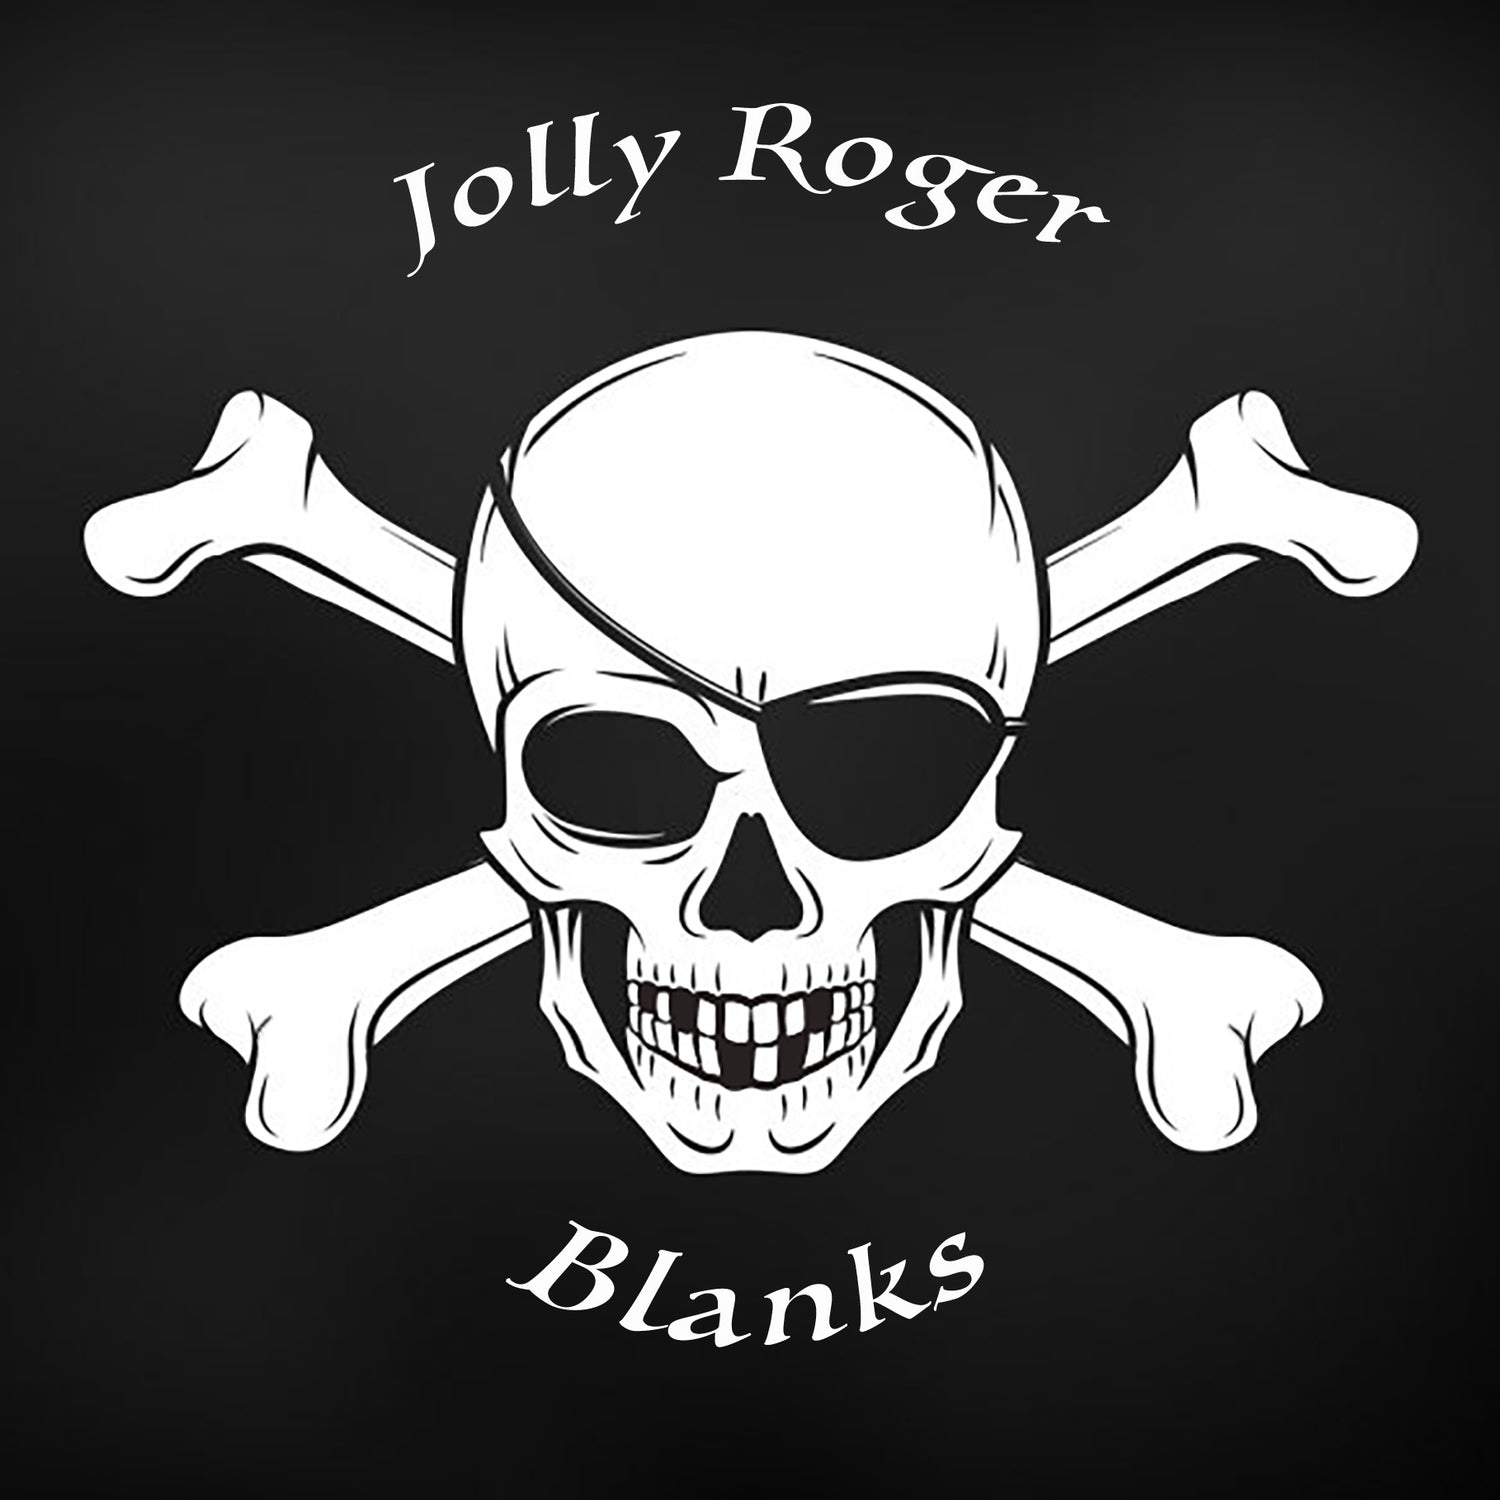 About Jolly Roger Blanks